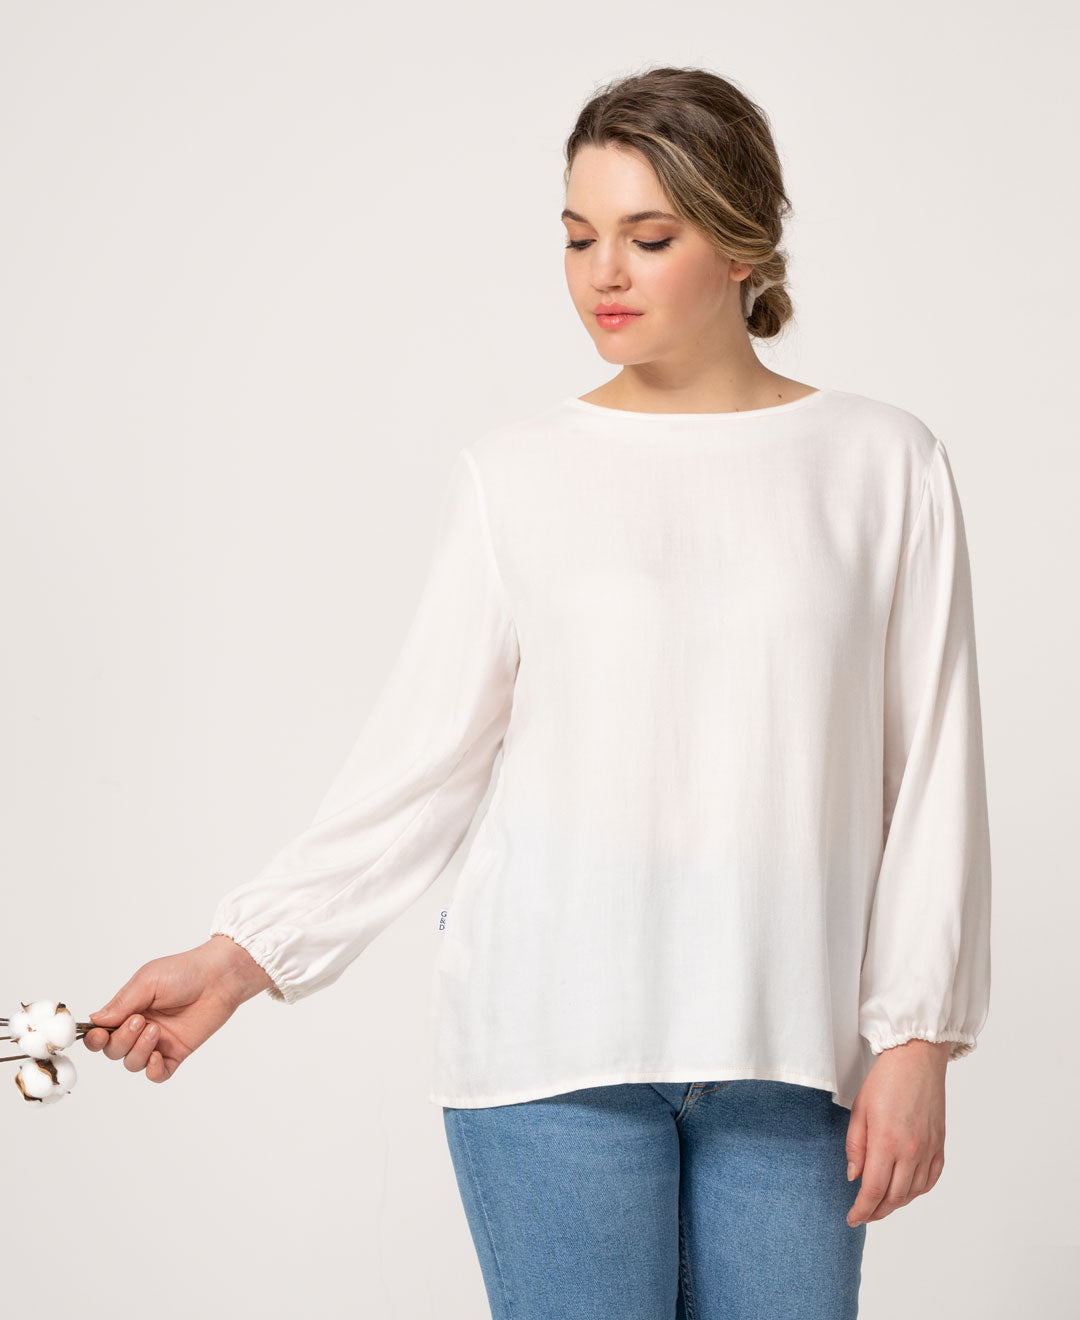 With defect - The organic cotton reversible floral blouse